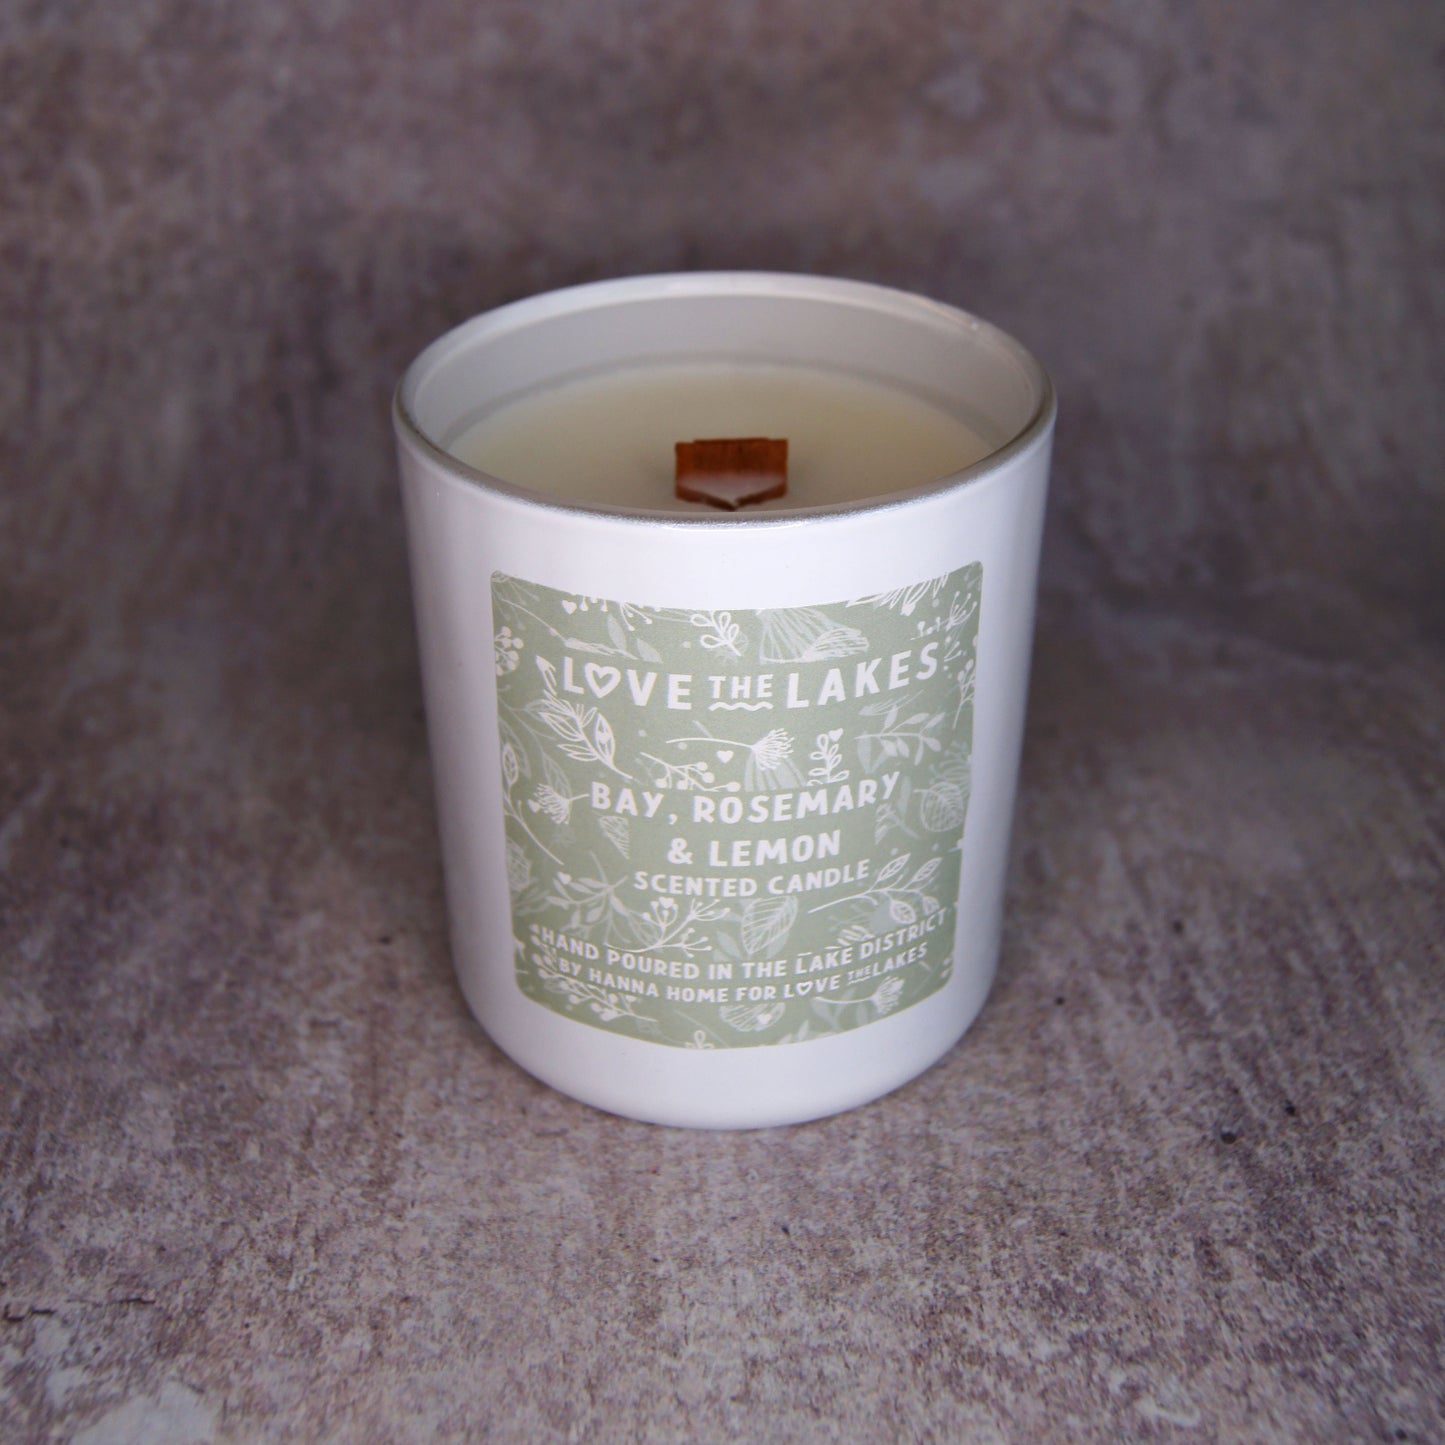 Bay, Rosemary & Lemon Scented Soy Wax Candle Jar